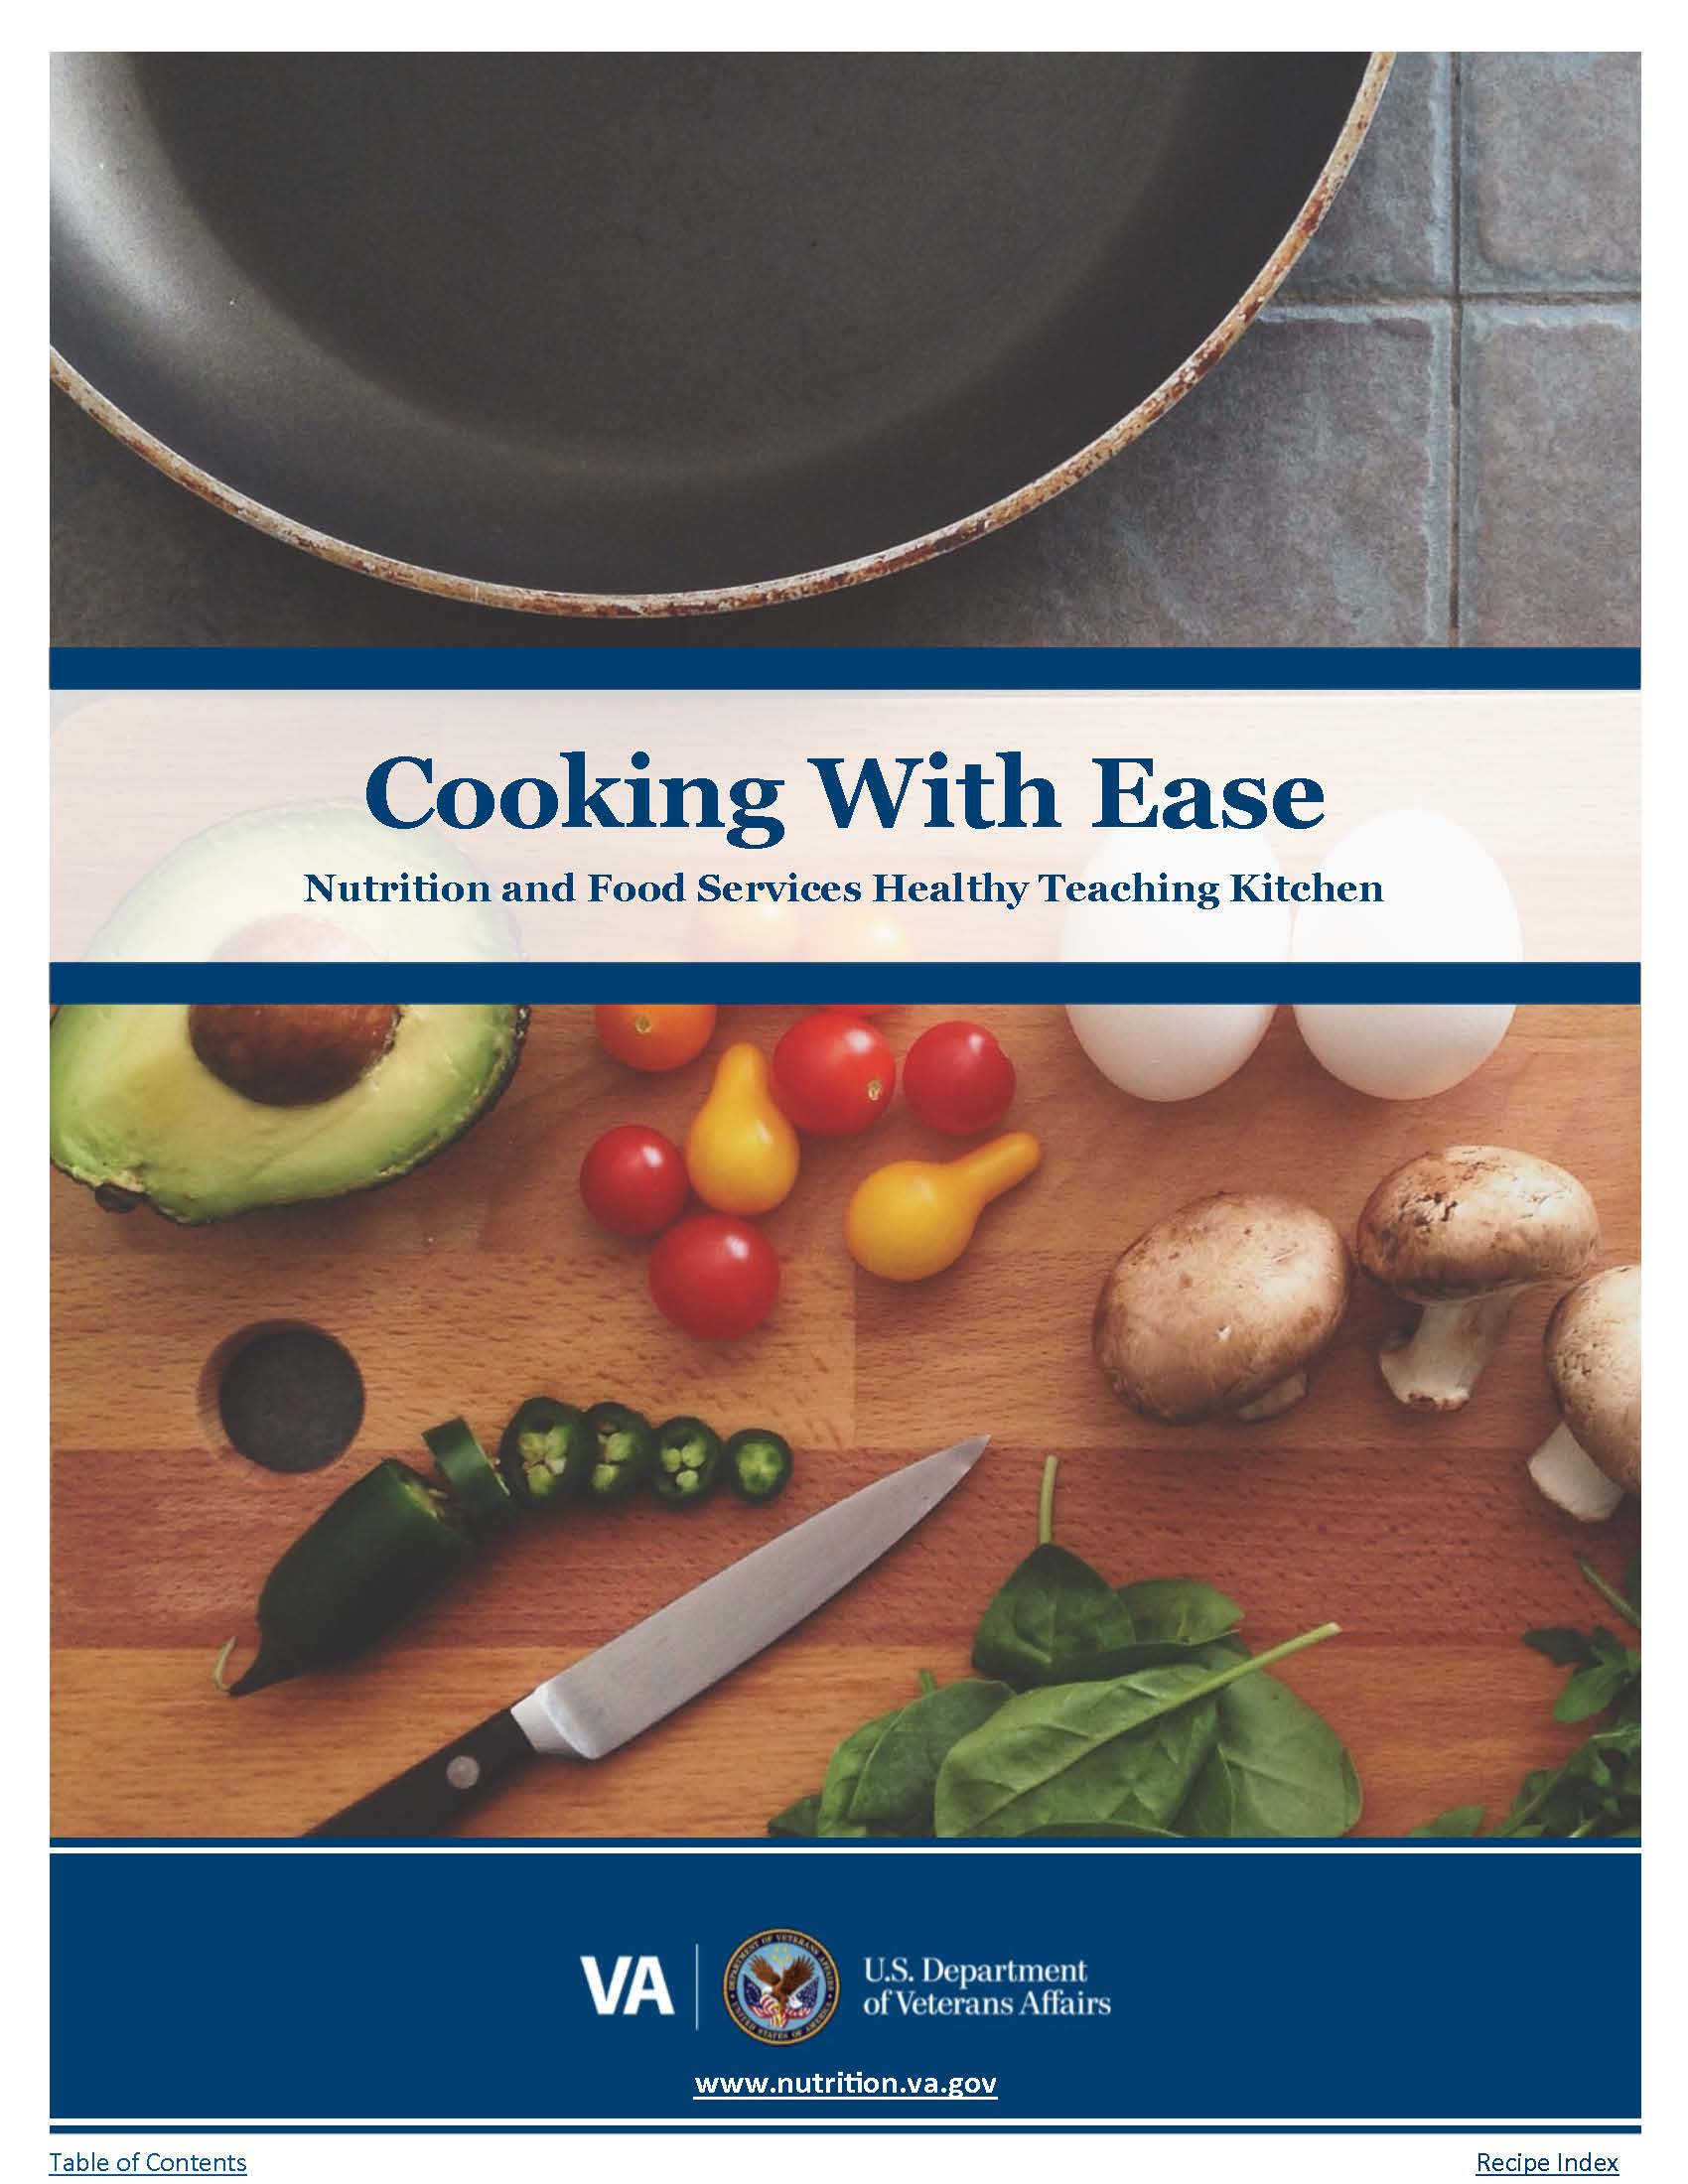 Cooking With Ease cookbook